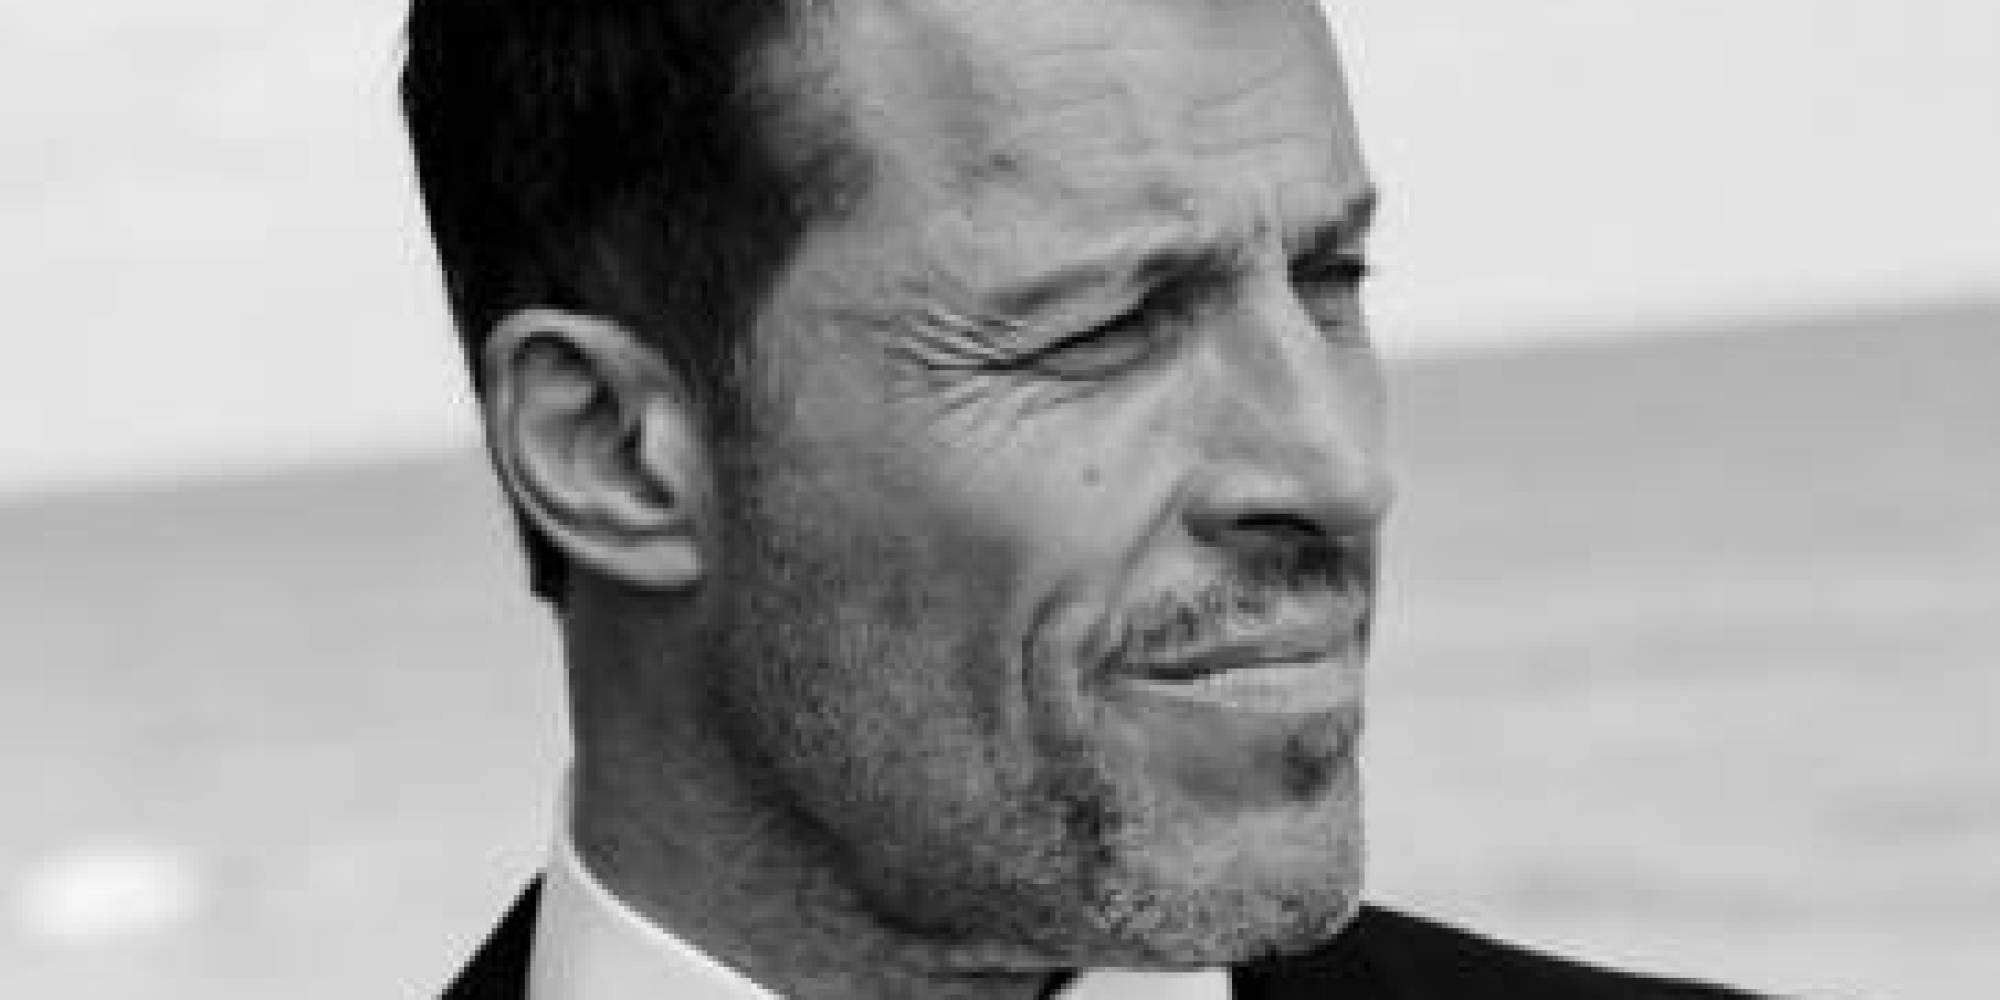 Interview with Tony Robbins on His New Book, 'Money 